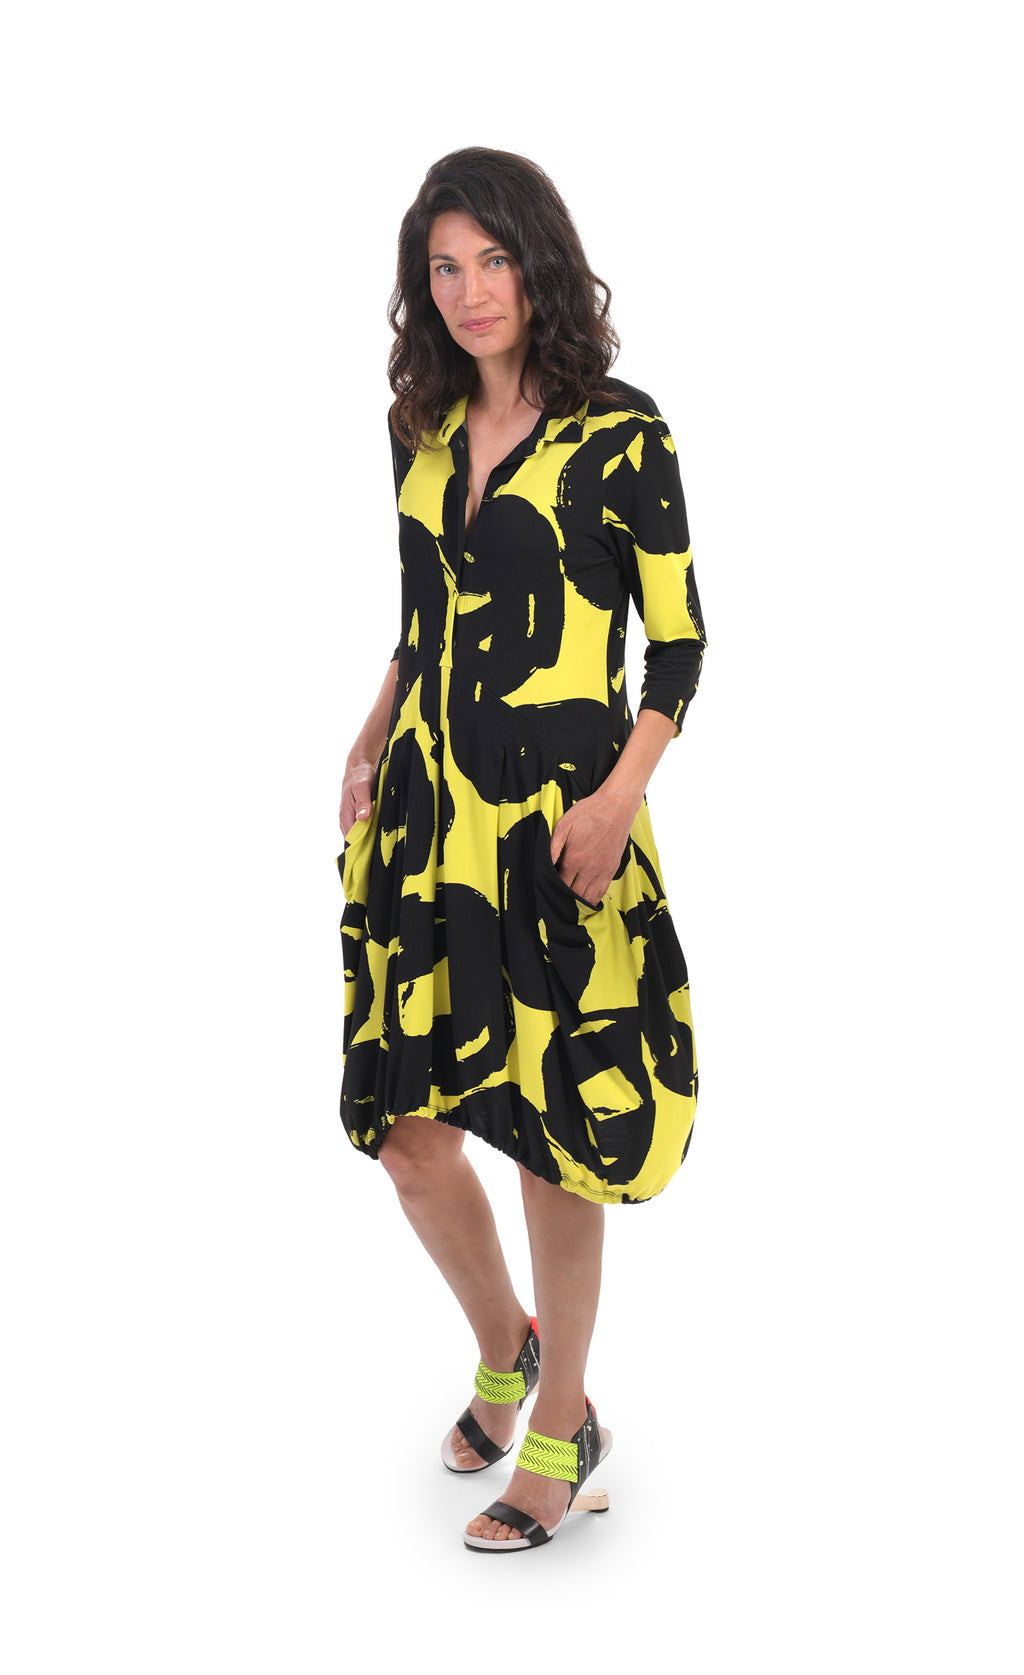 Front full body view of a woman wearing the alembika art print wonderful collar dress. This dress is tapered in at the torso with a poof skirt. It is lime with a black swirl print. The front has two pockets on the skirt, a half button front, and 3/4 length sleeves.